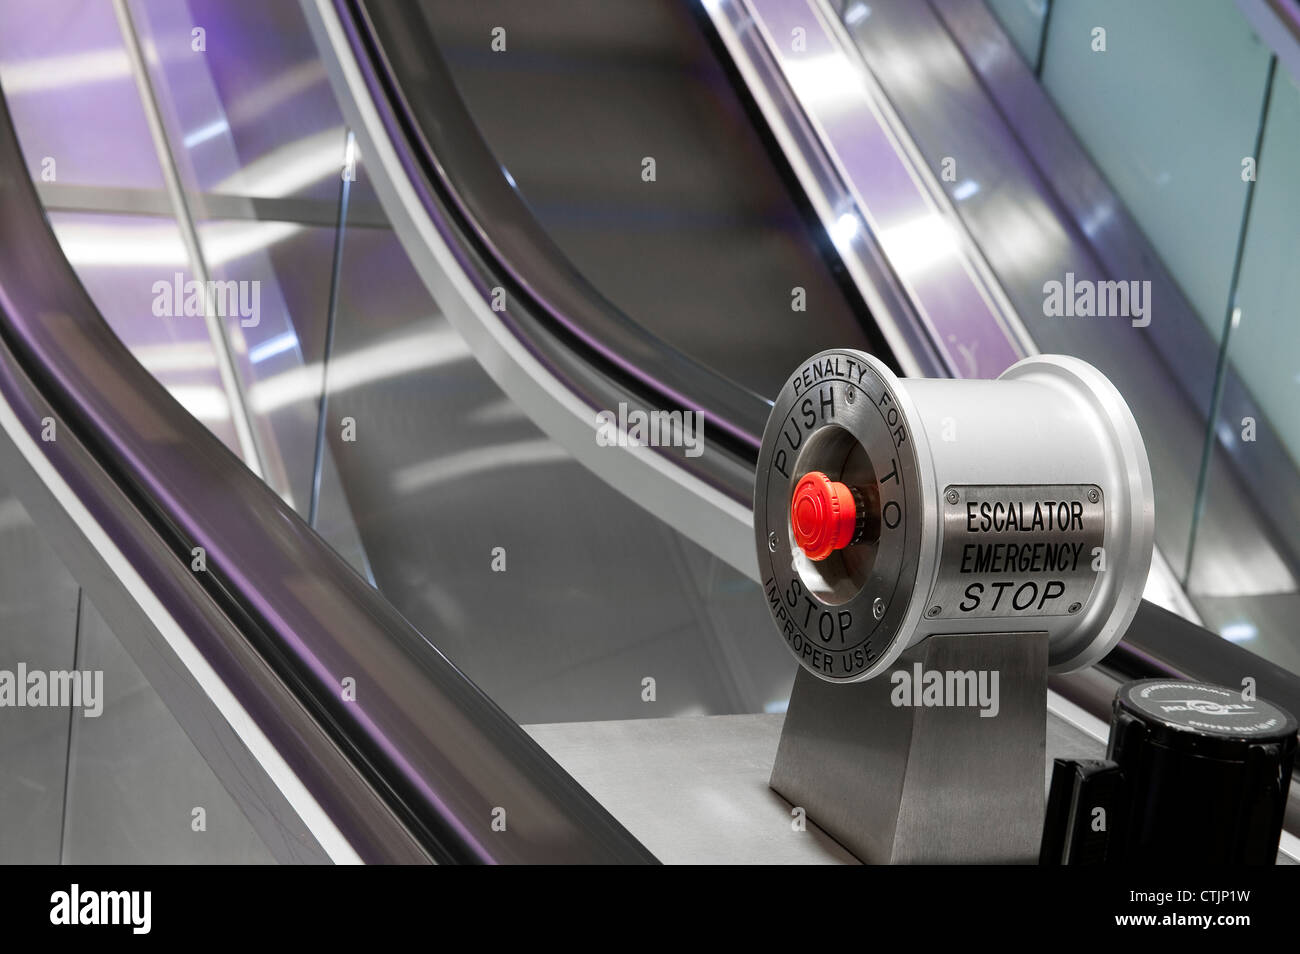 Emergency stop button on escalators in a London railway station, England. Stock Photo